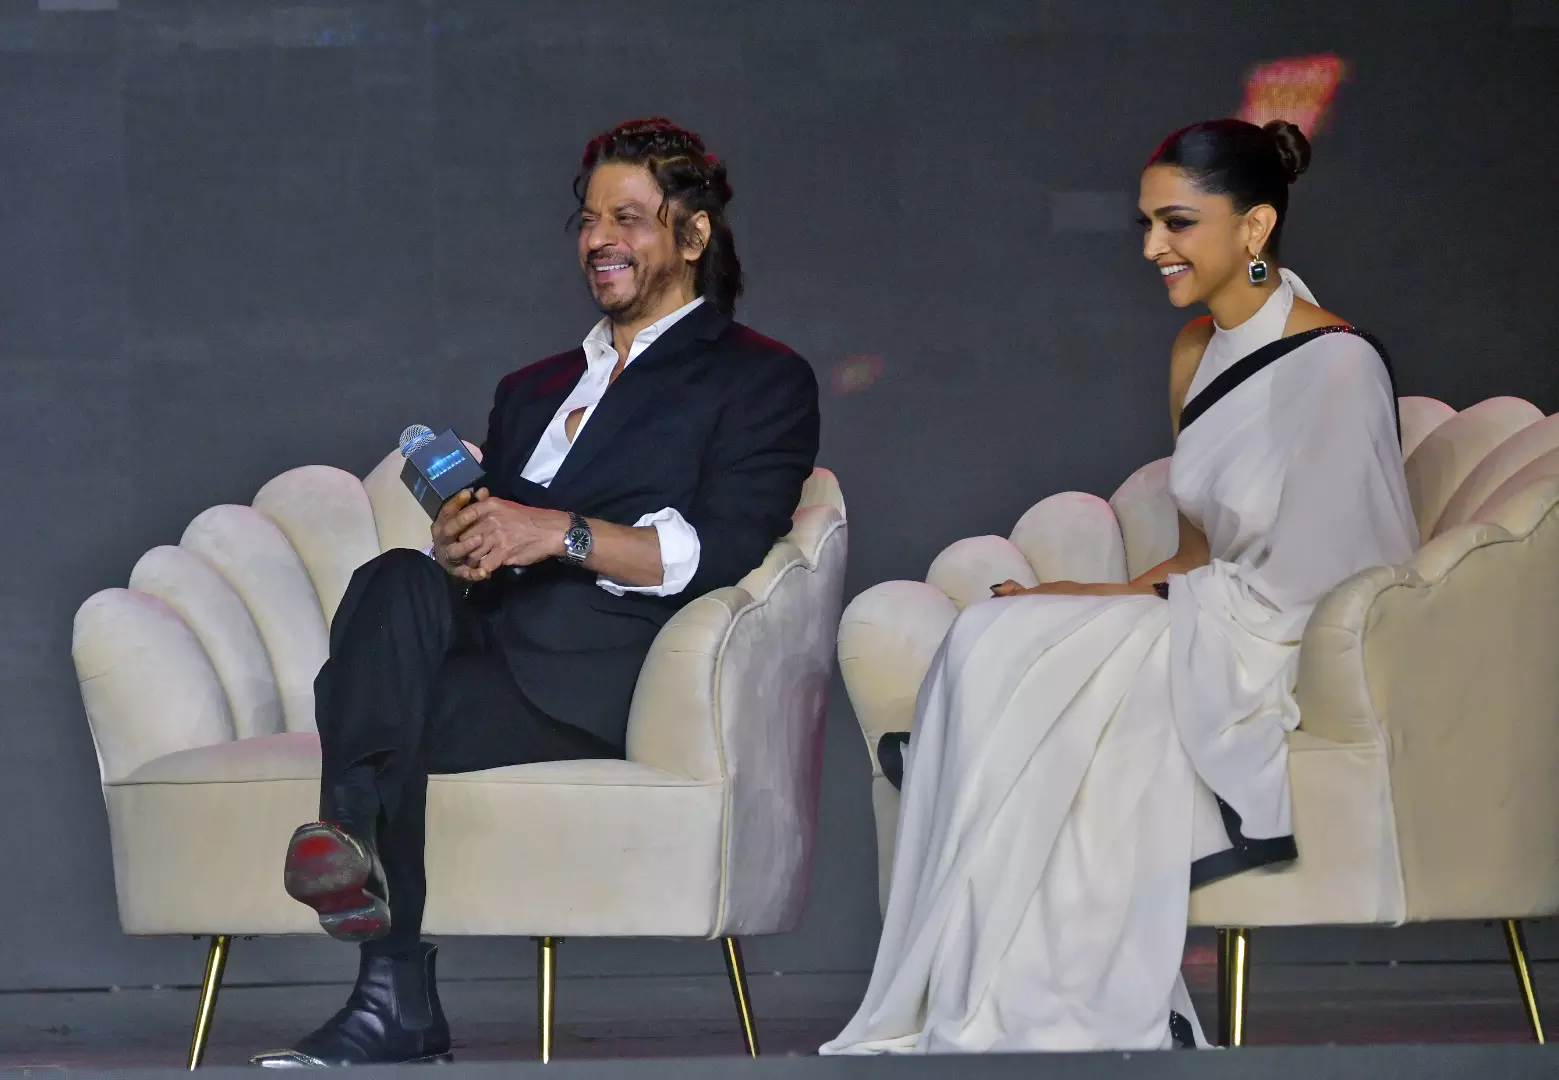 Why did she do Jawan? Its the role, and its for SRK, says Deepika